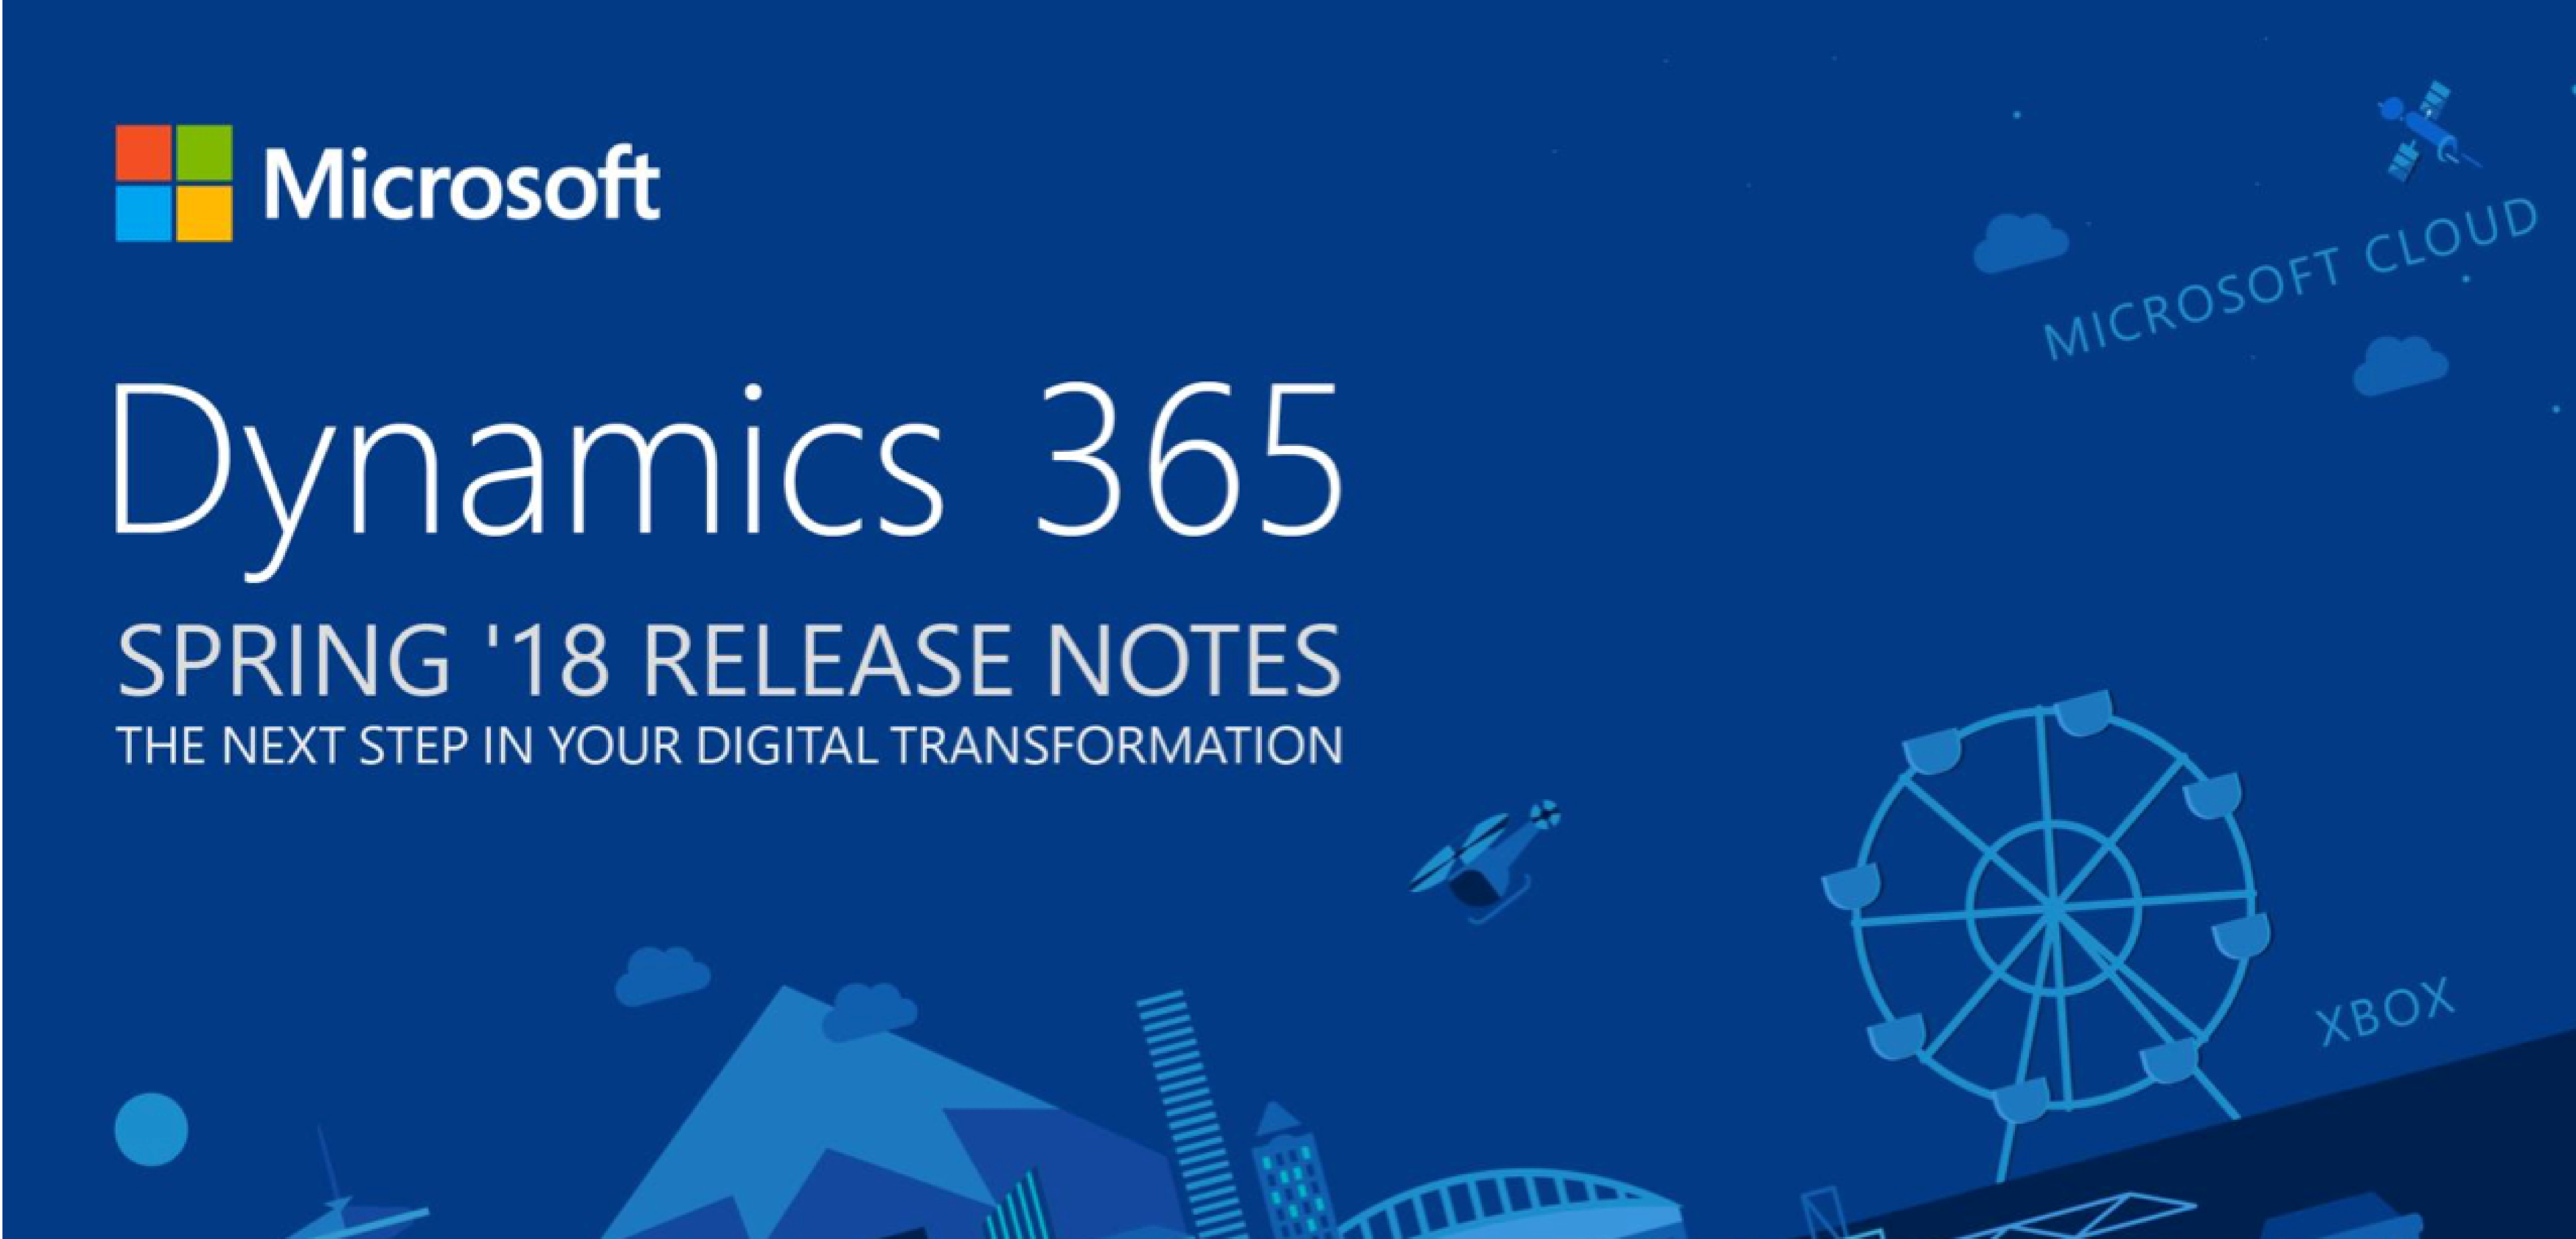 Dynamics 365 Spring '18 Release